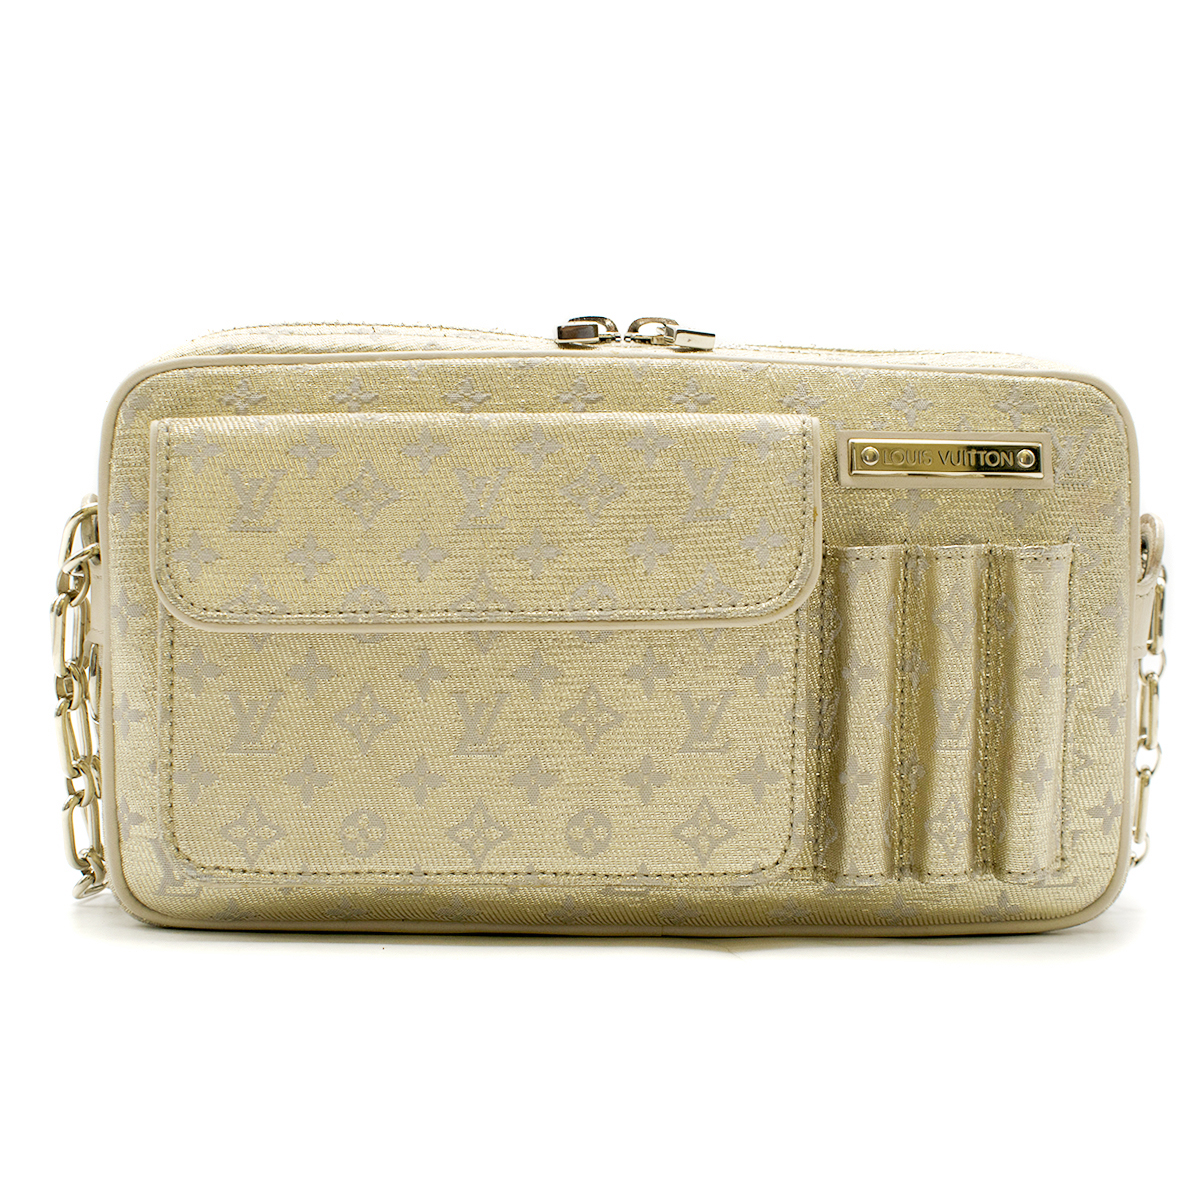 Louis Vuitton Small Gold Limited Edition Monogram Bag | HEWI